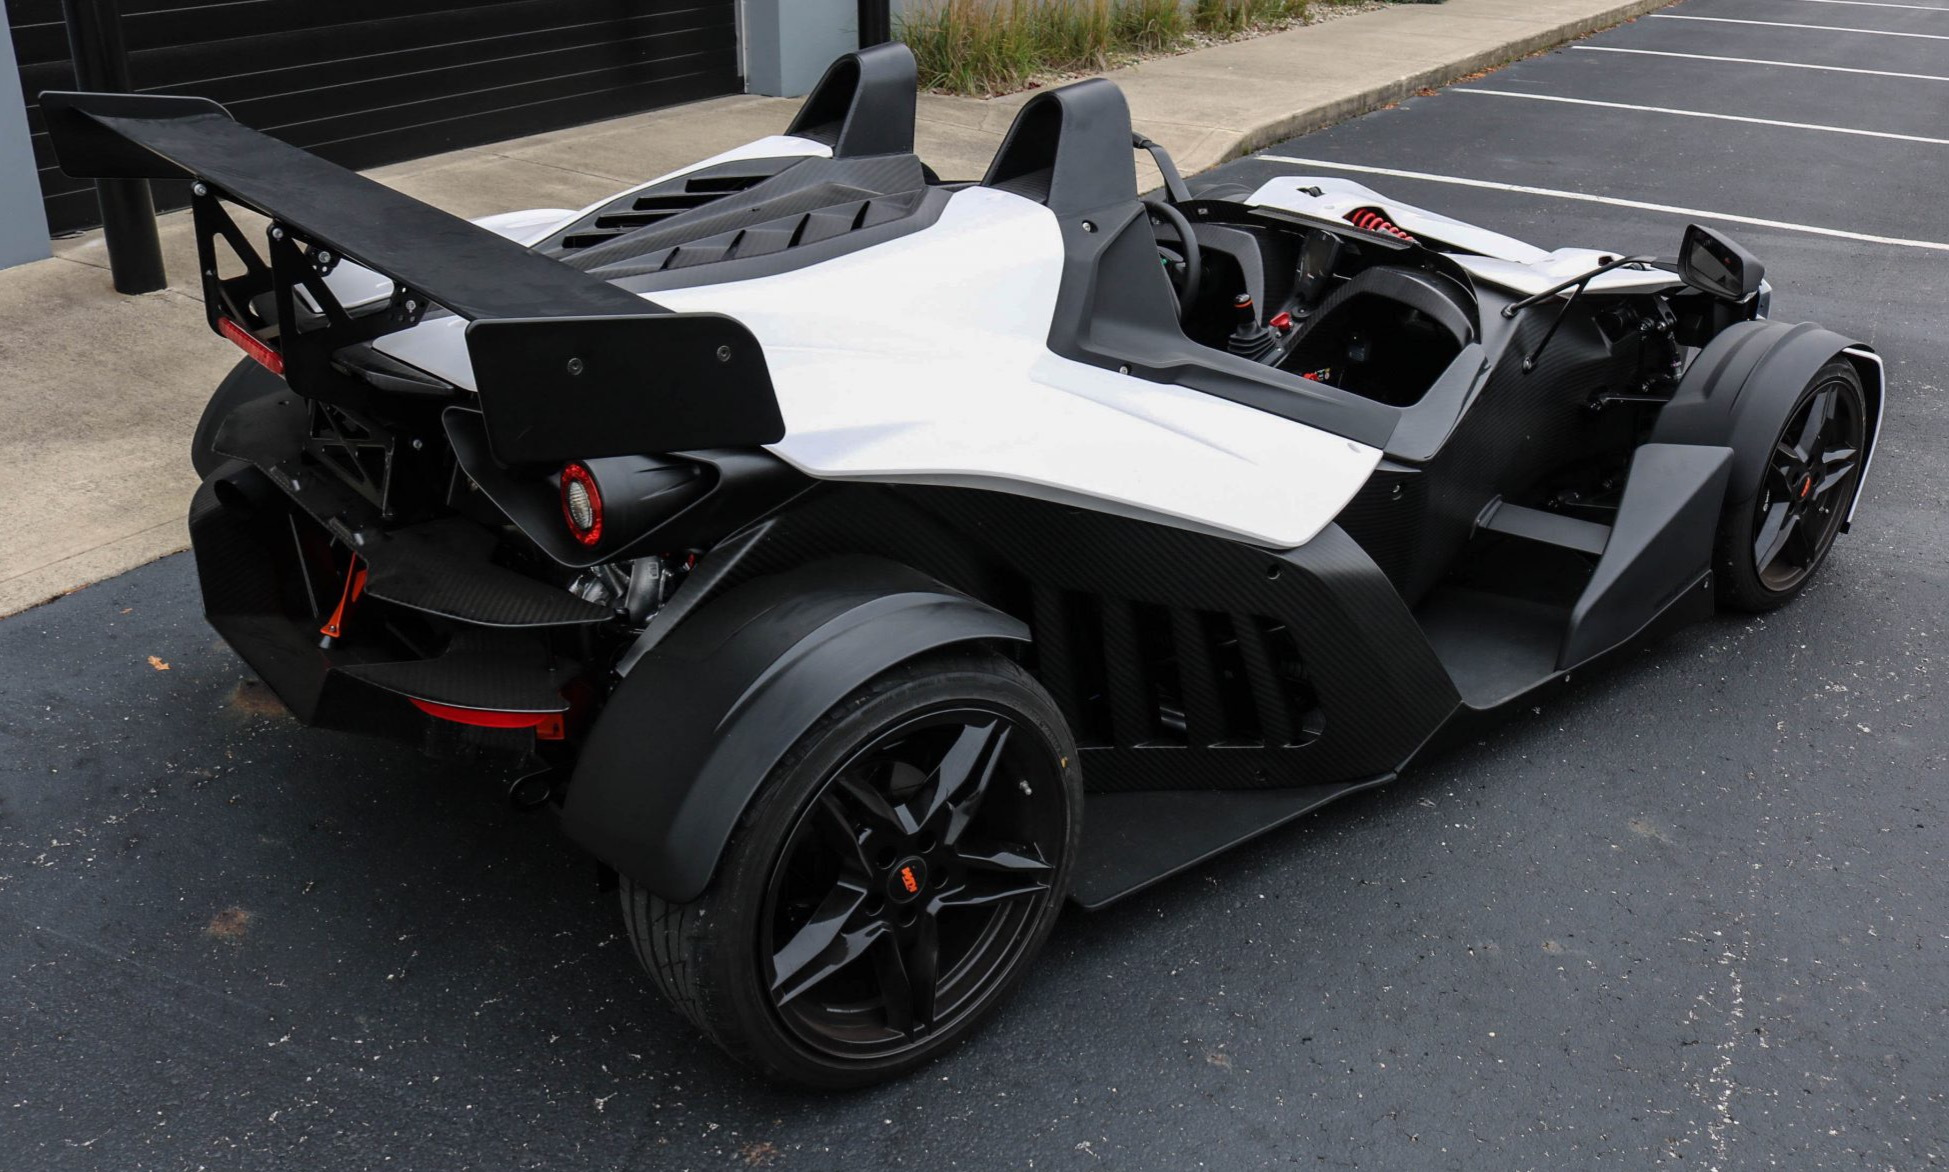 KTM X-Bow GT now available in Australia, adds windscreen – PerformanceDrive